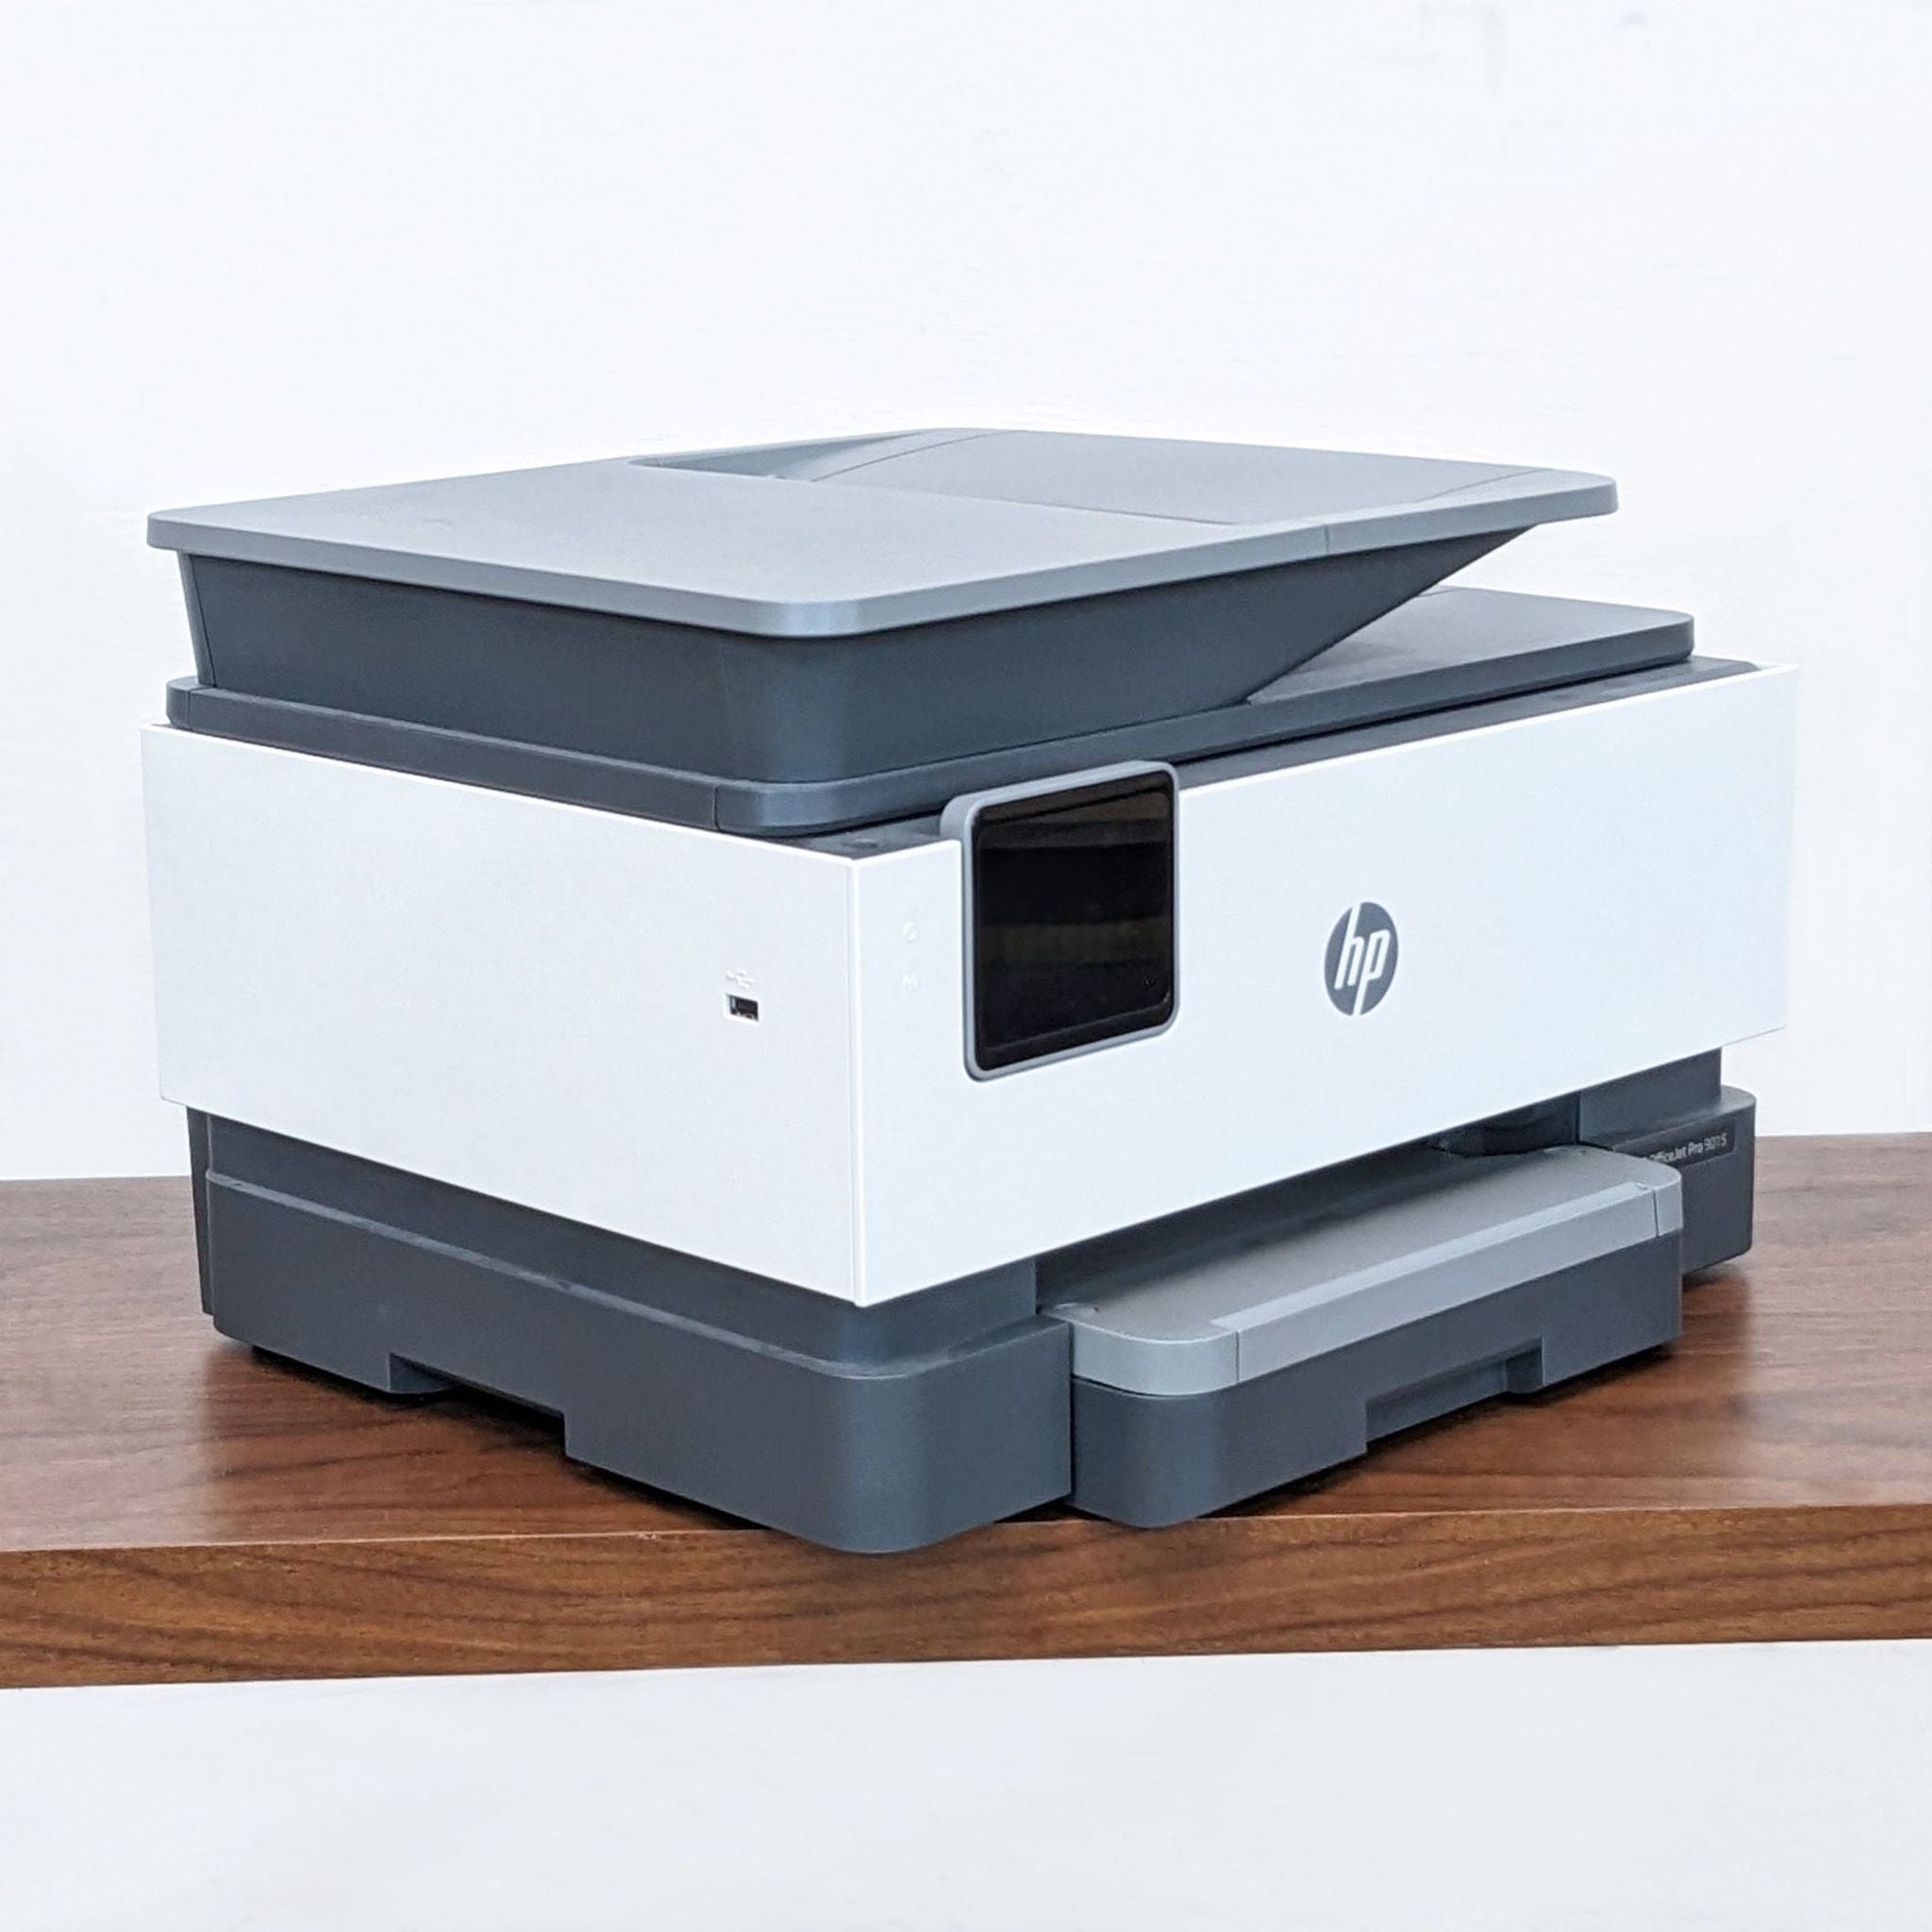 HP OfficeJet Pro 9015 printer viewed from the front, paper tray extended, ready for use.